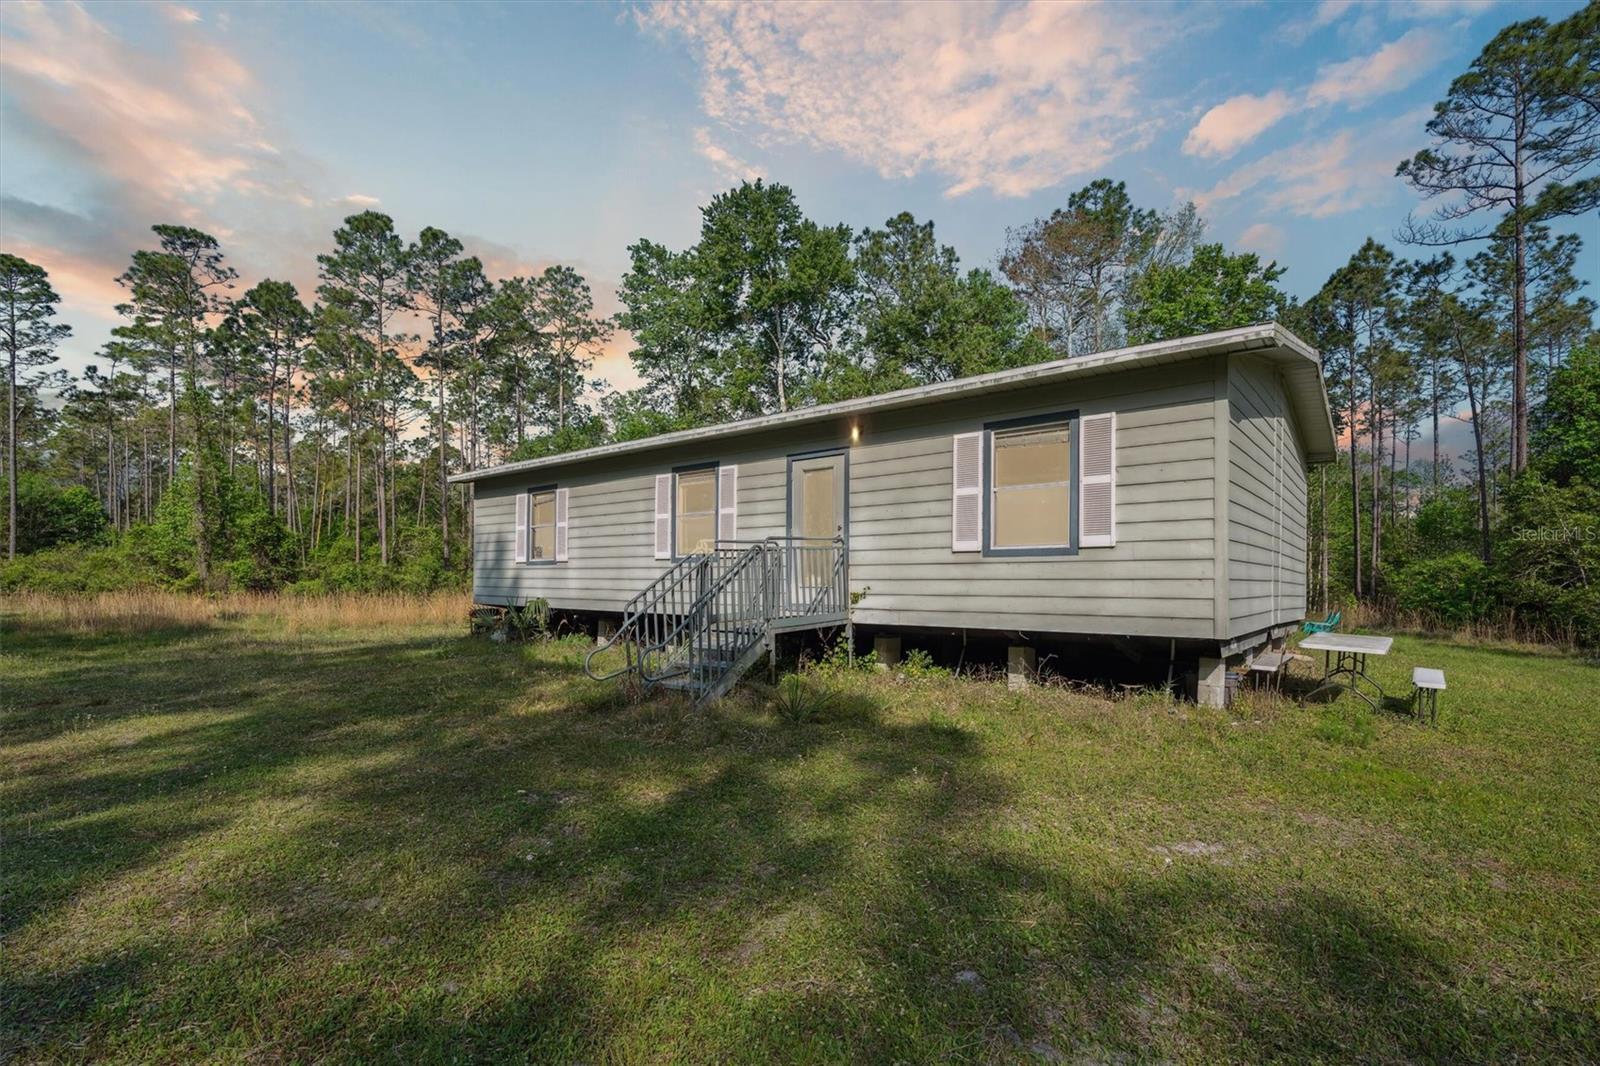 Details for 0000 Moody Grade, CHIEFLAND, FL 32626